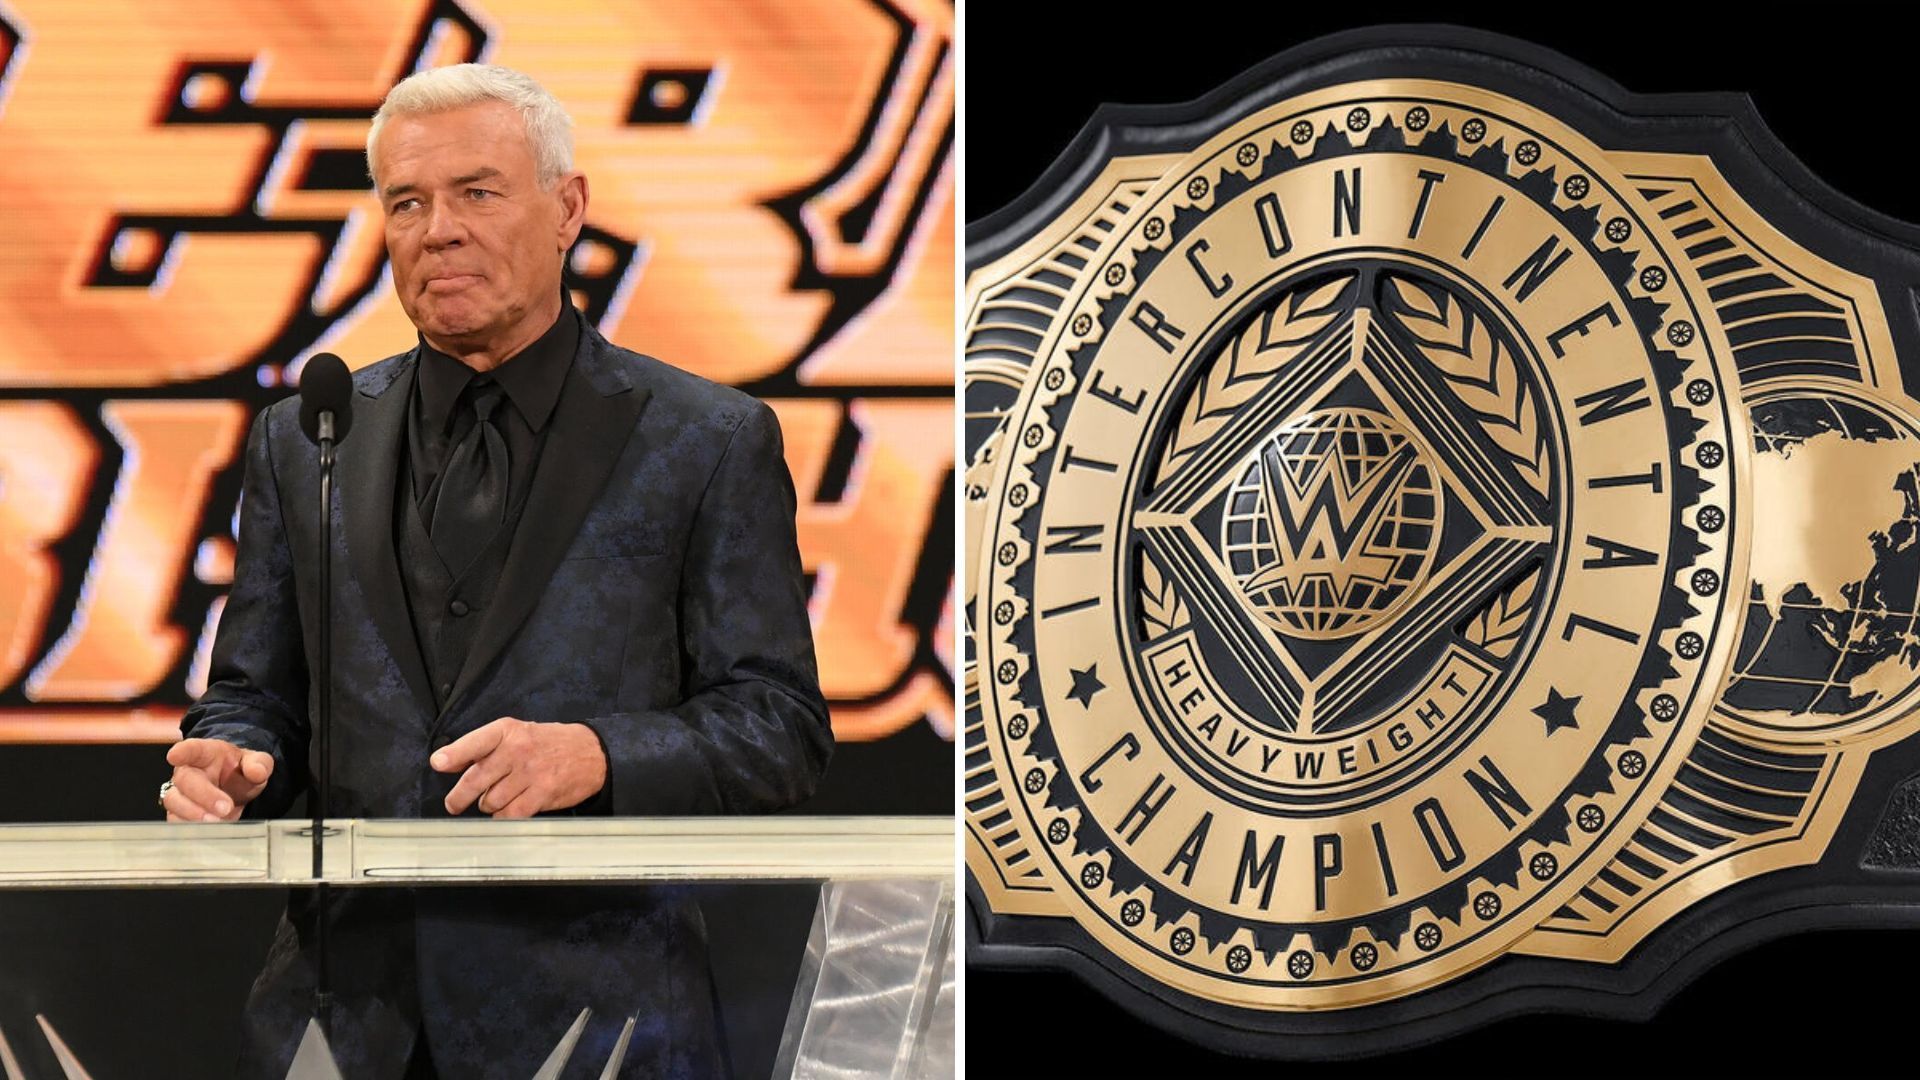 Eric Bischoff rarely shies away from expressing his views 